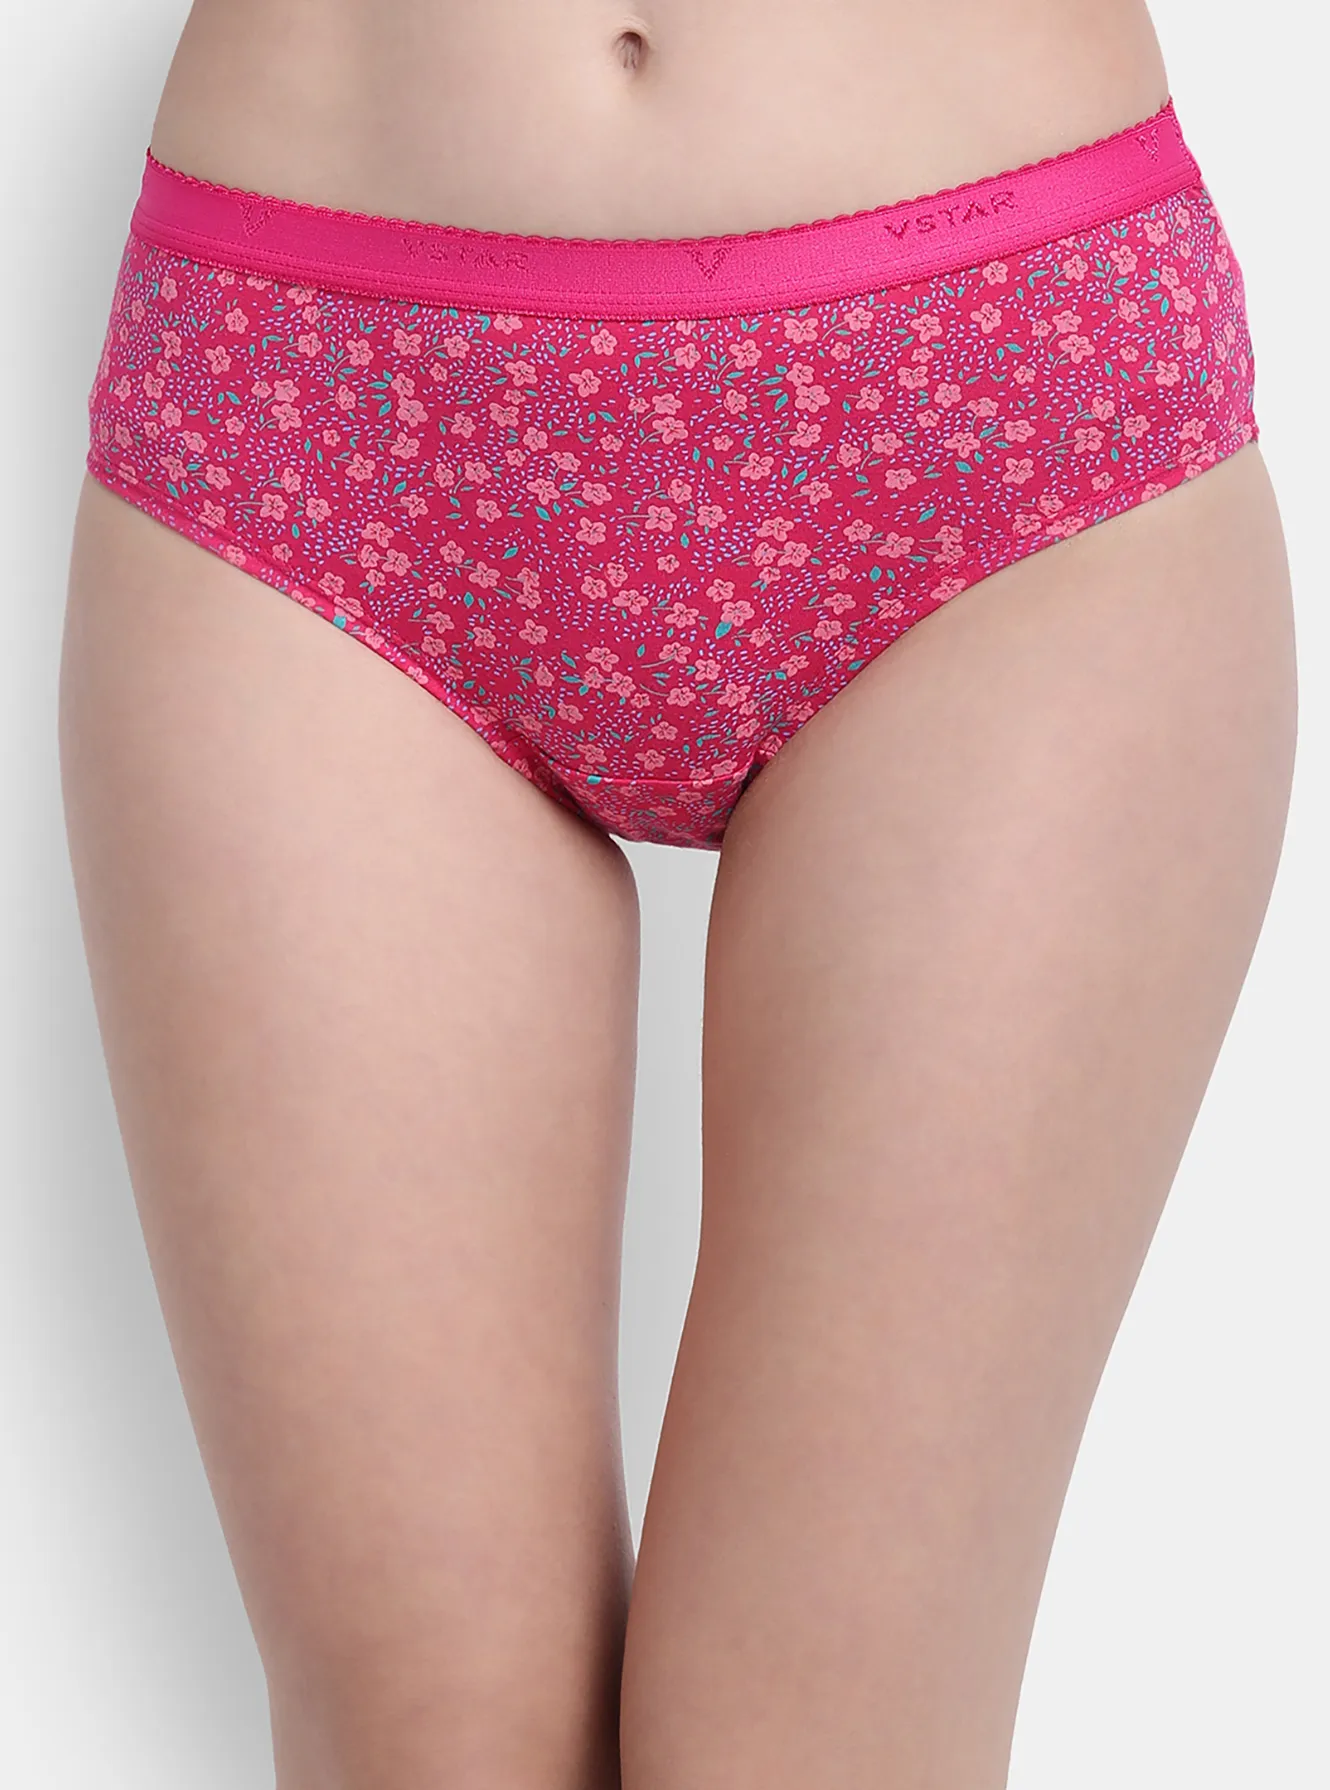 Girls Panty with Exposed Elastic Waistband (Pack of 2) - Violet & Assorted  Print